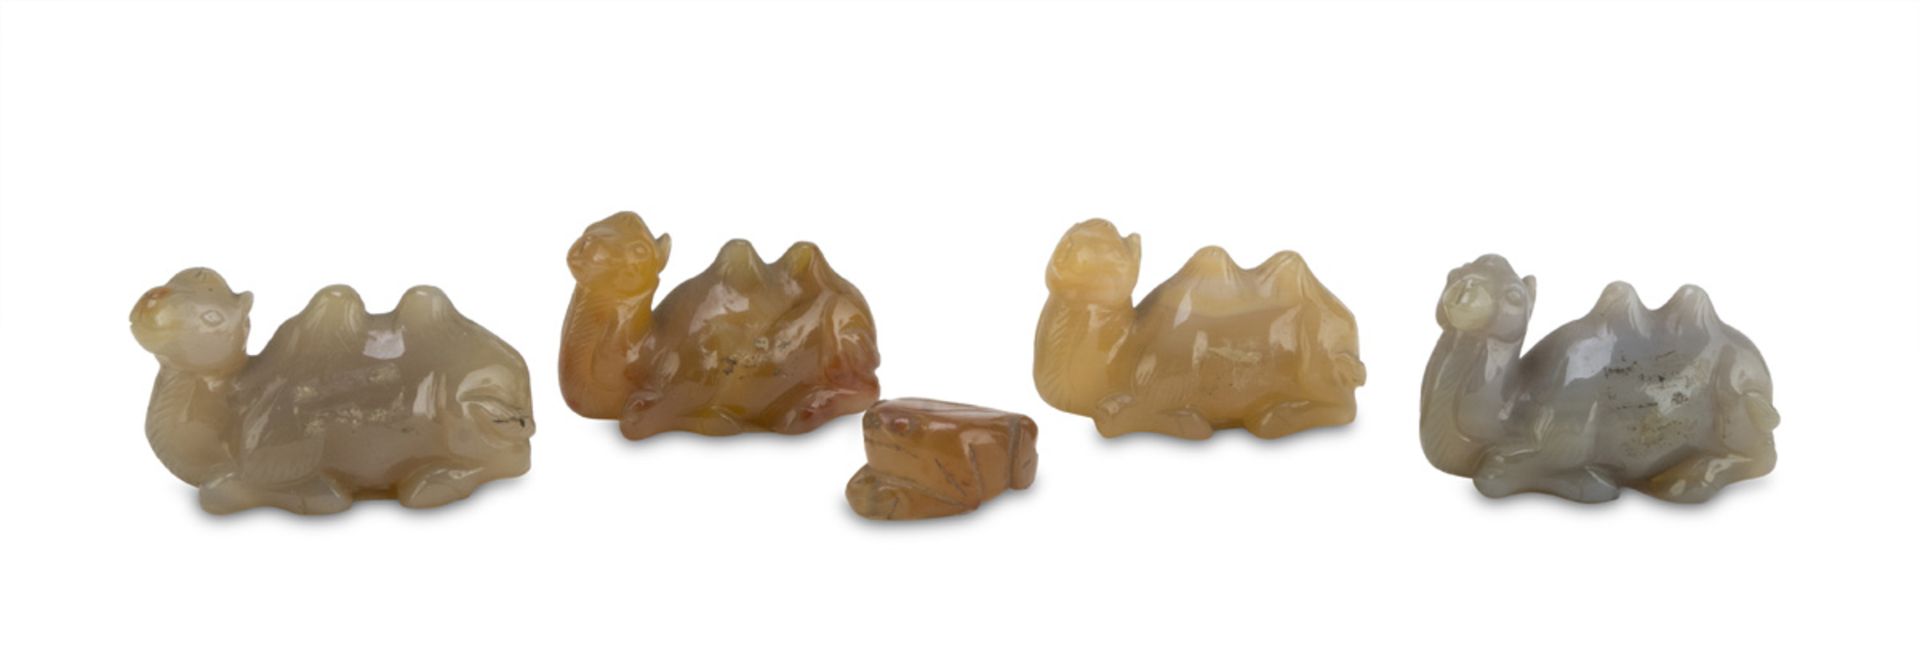 FIVE SMALL SCULPTURES IN CHALCEDONY, CHINA 20TH CENTURY representing four camels and a frog. Max.